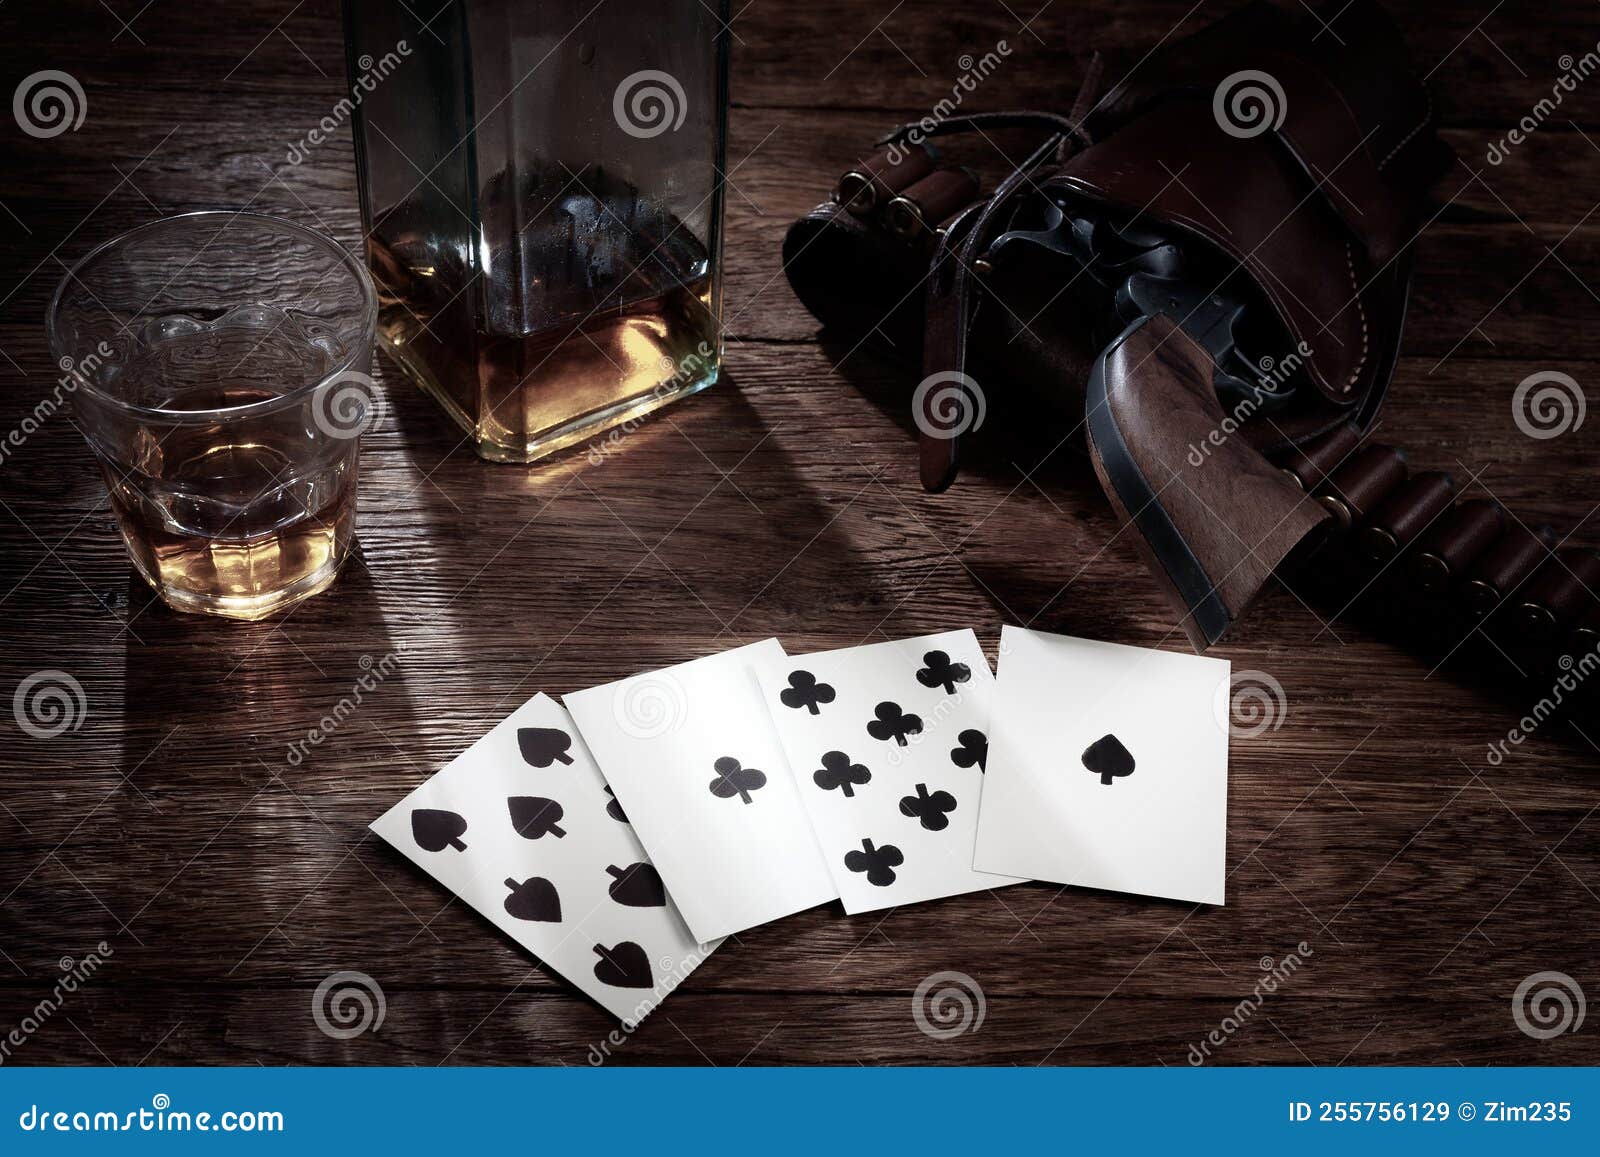 old west poker. dead man`s hand. two-pair poker hand consisting of the black aces and black eights, held by old west gunfighter